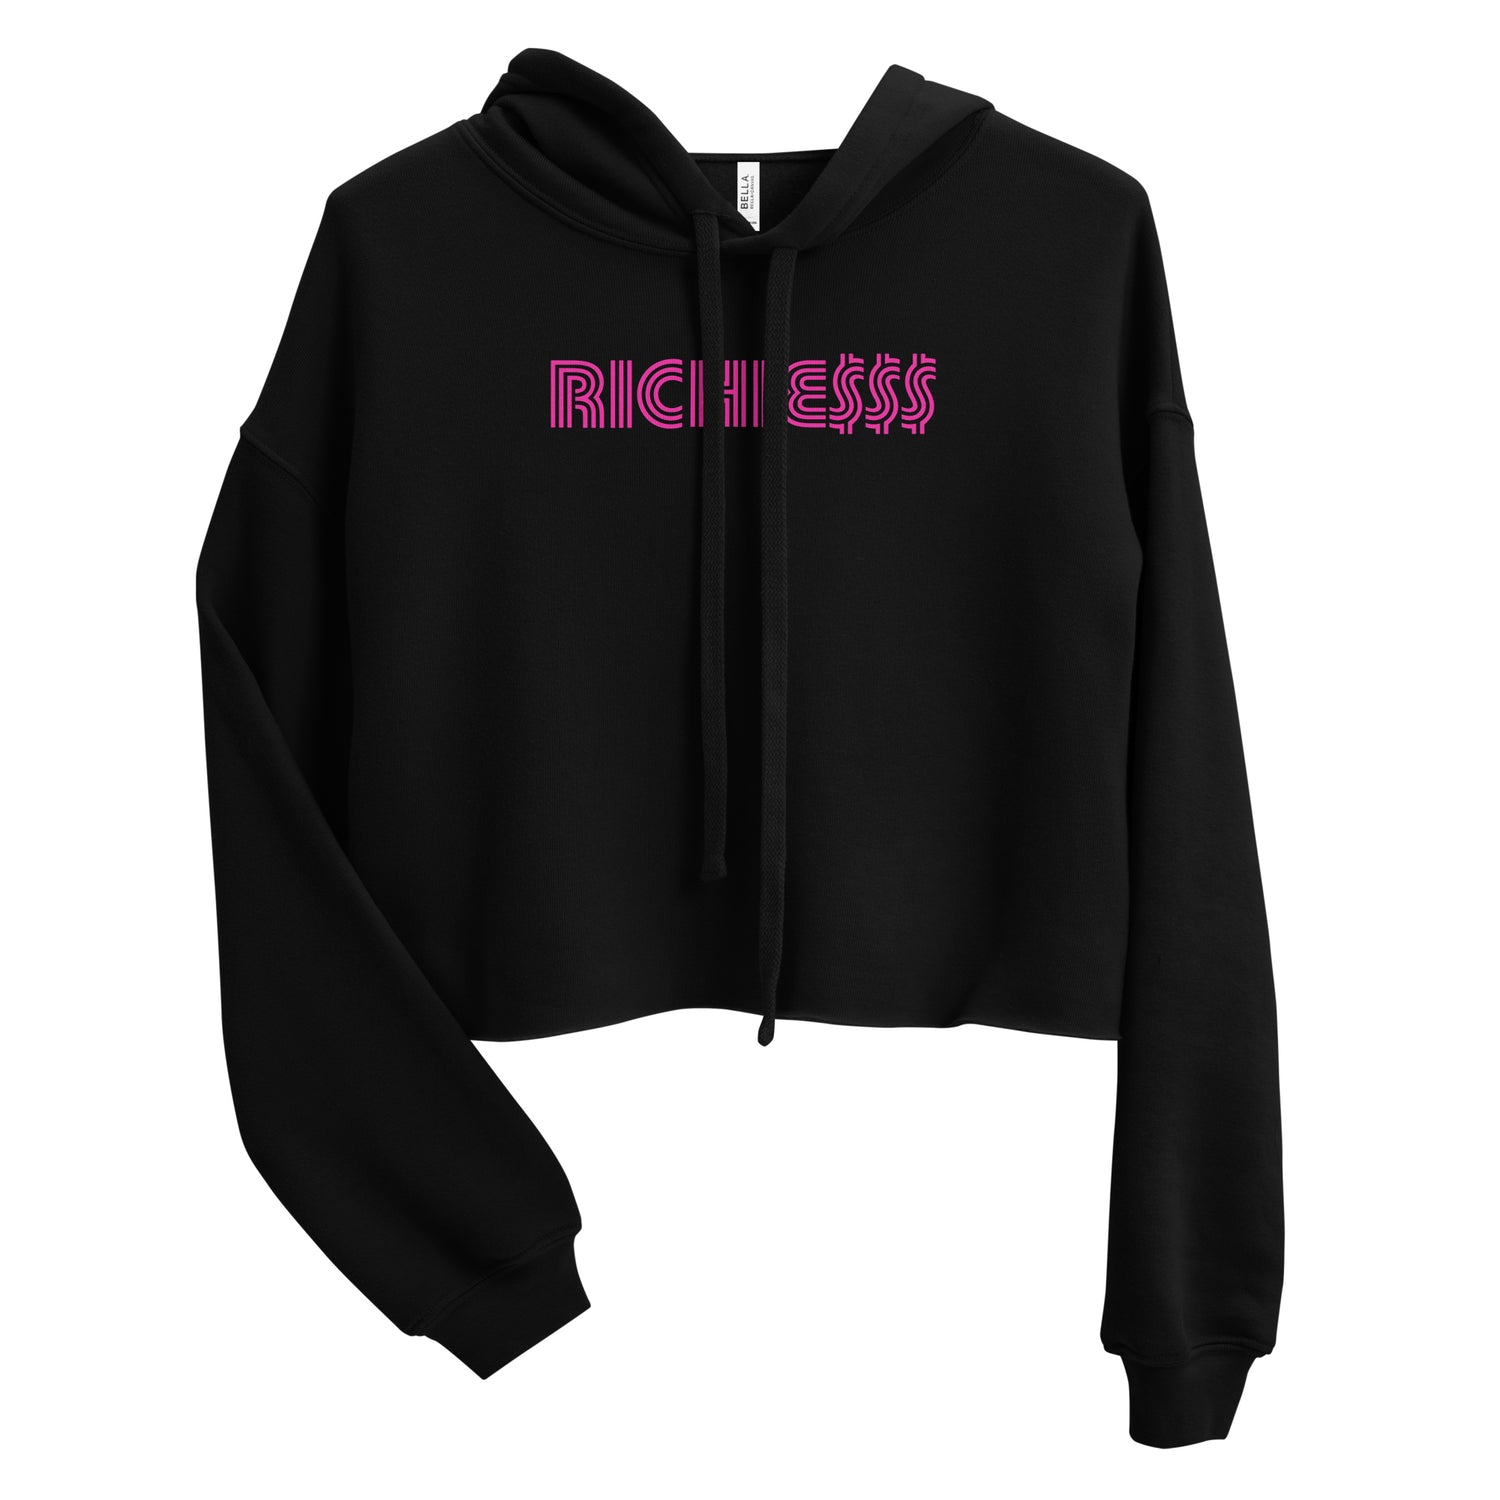 Even the Rich Richies Women's Cropped Hoodie